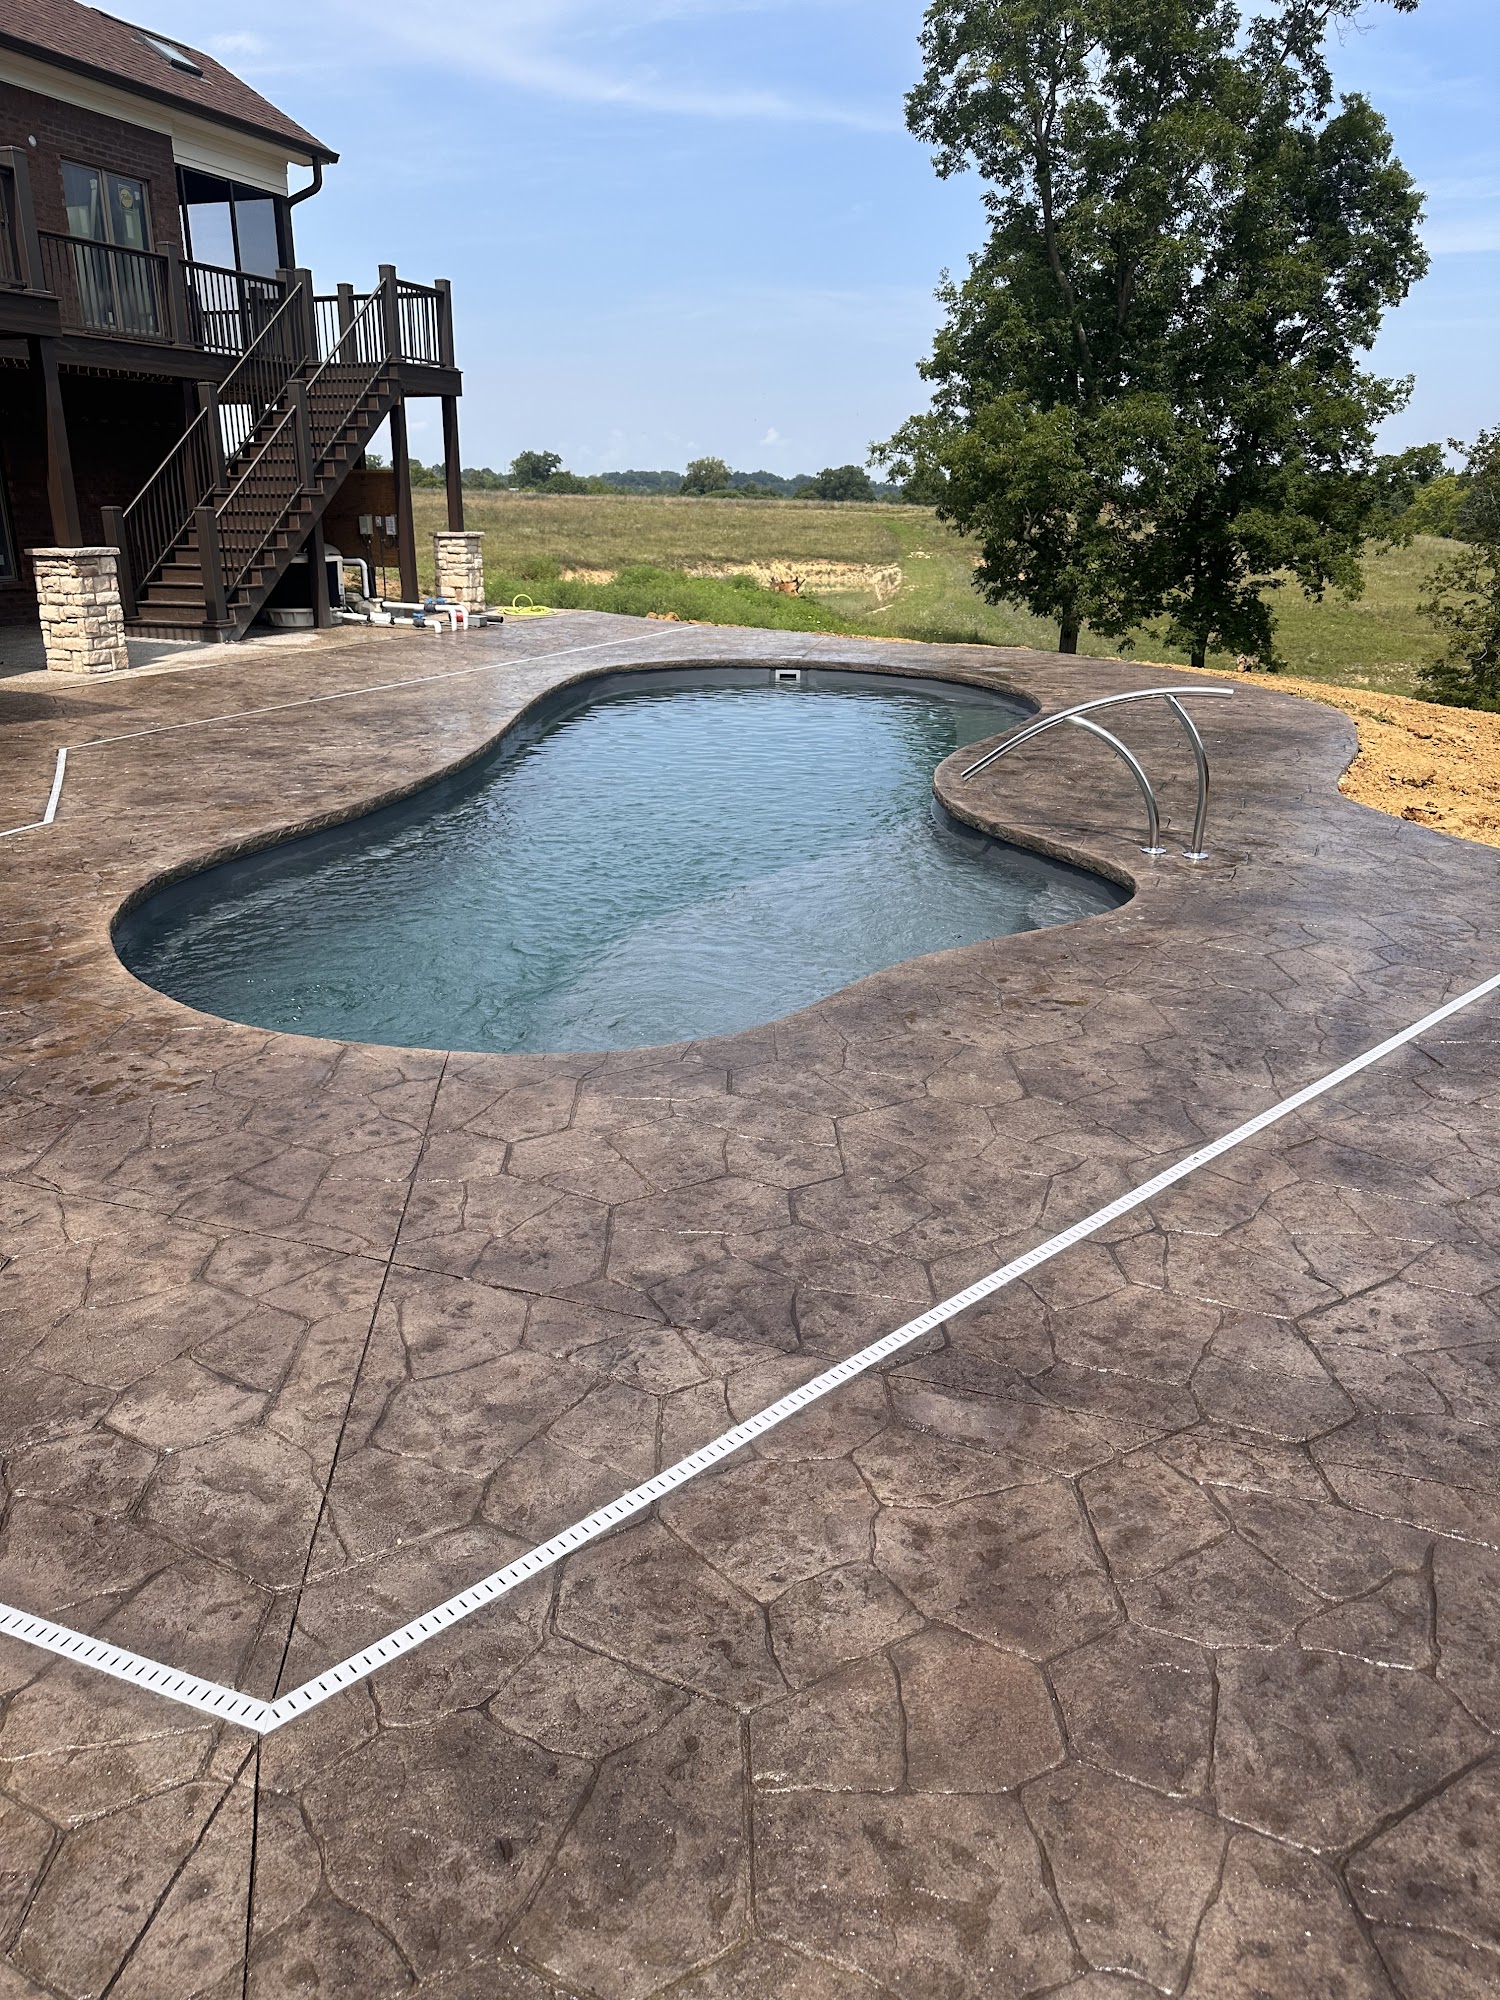 Wetscapes Fiberglass Pools 6437 Anna Louise Dr, Charlestown Indiana 47111